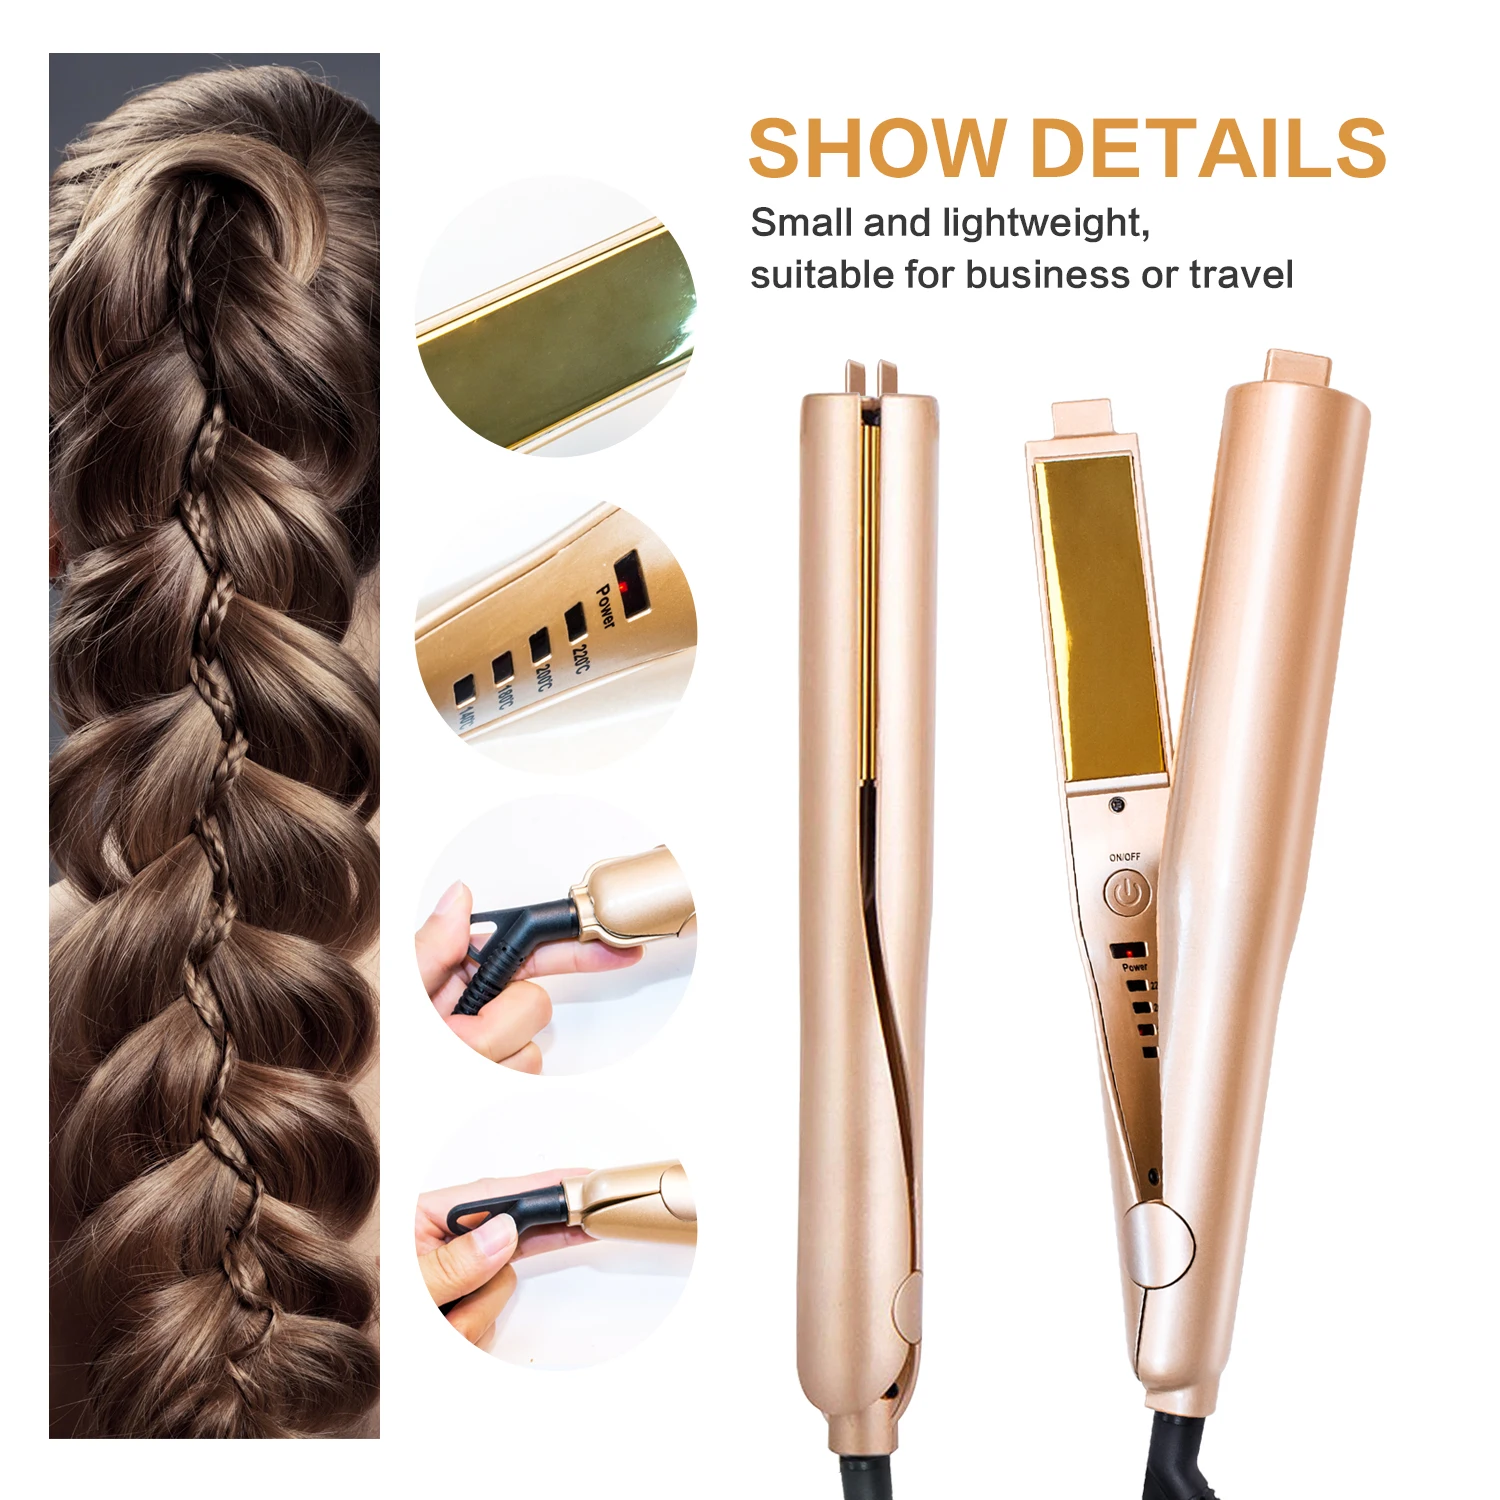 

Electric Flat Iron Hair Straightener&Curler 2 In 1 Twisted Hair Styling Tools Smoothing Iron Negative Straighteners Hair Crimp